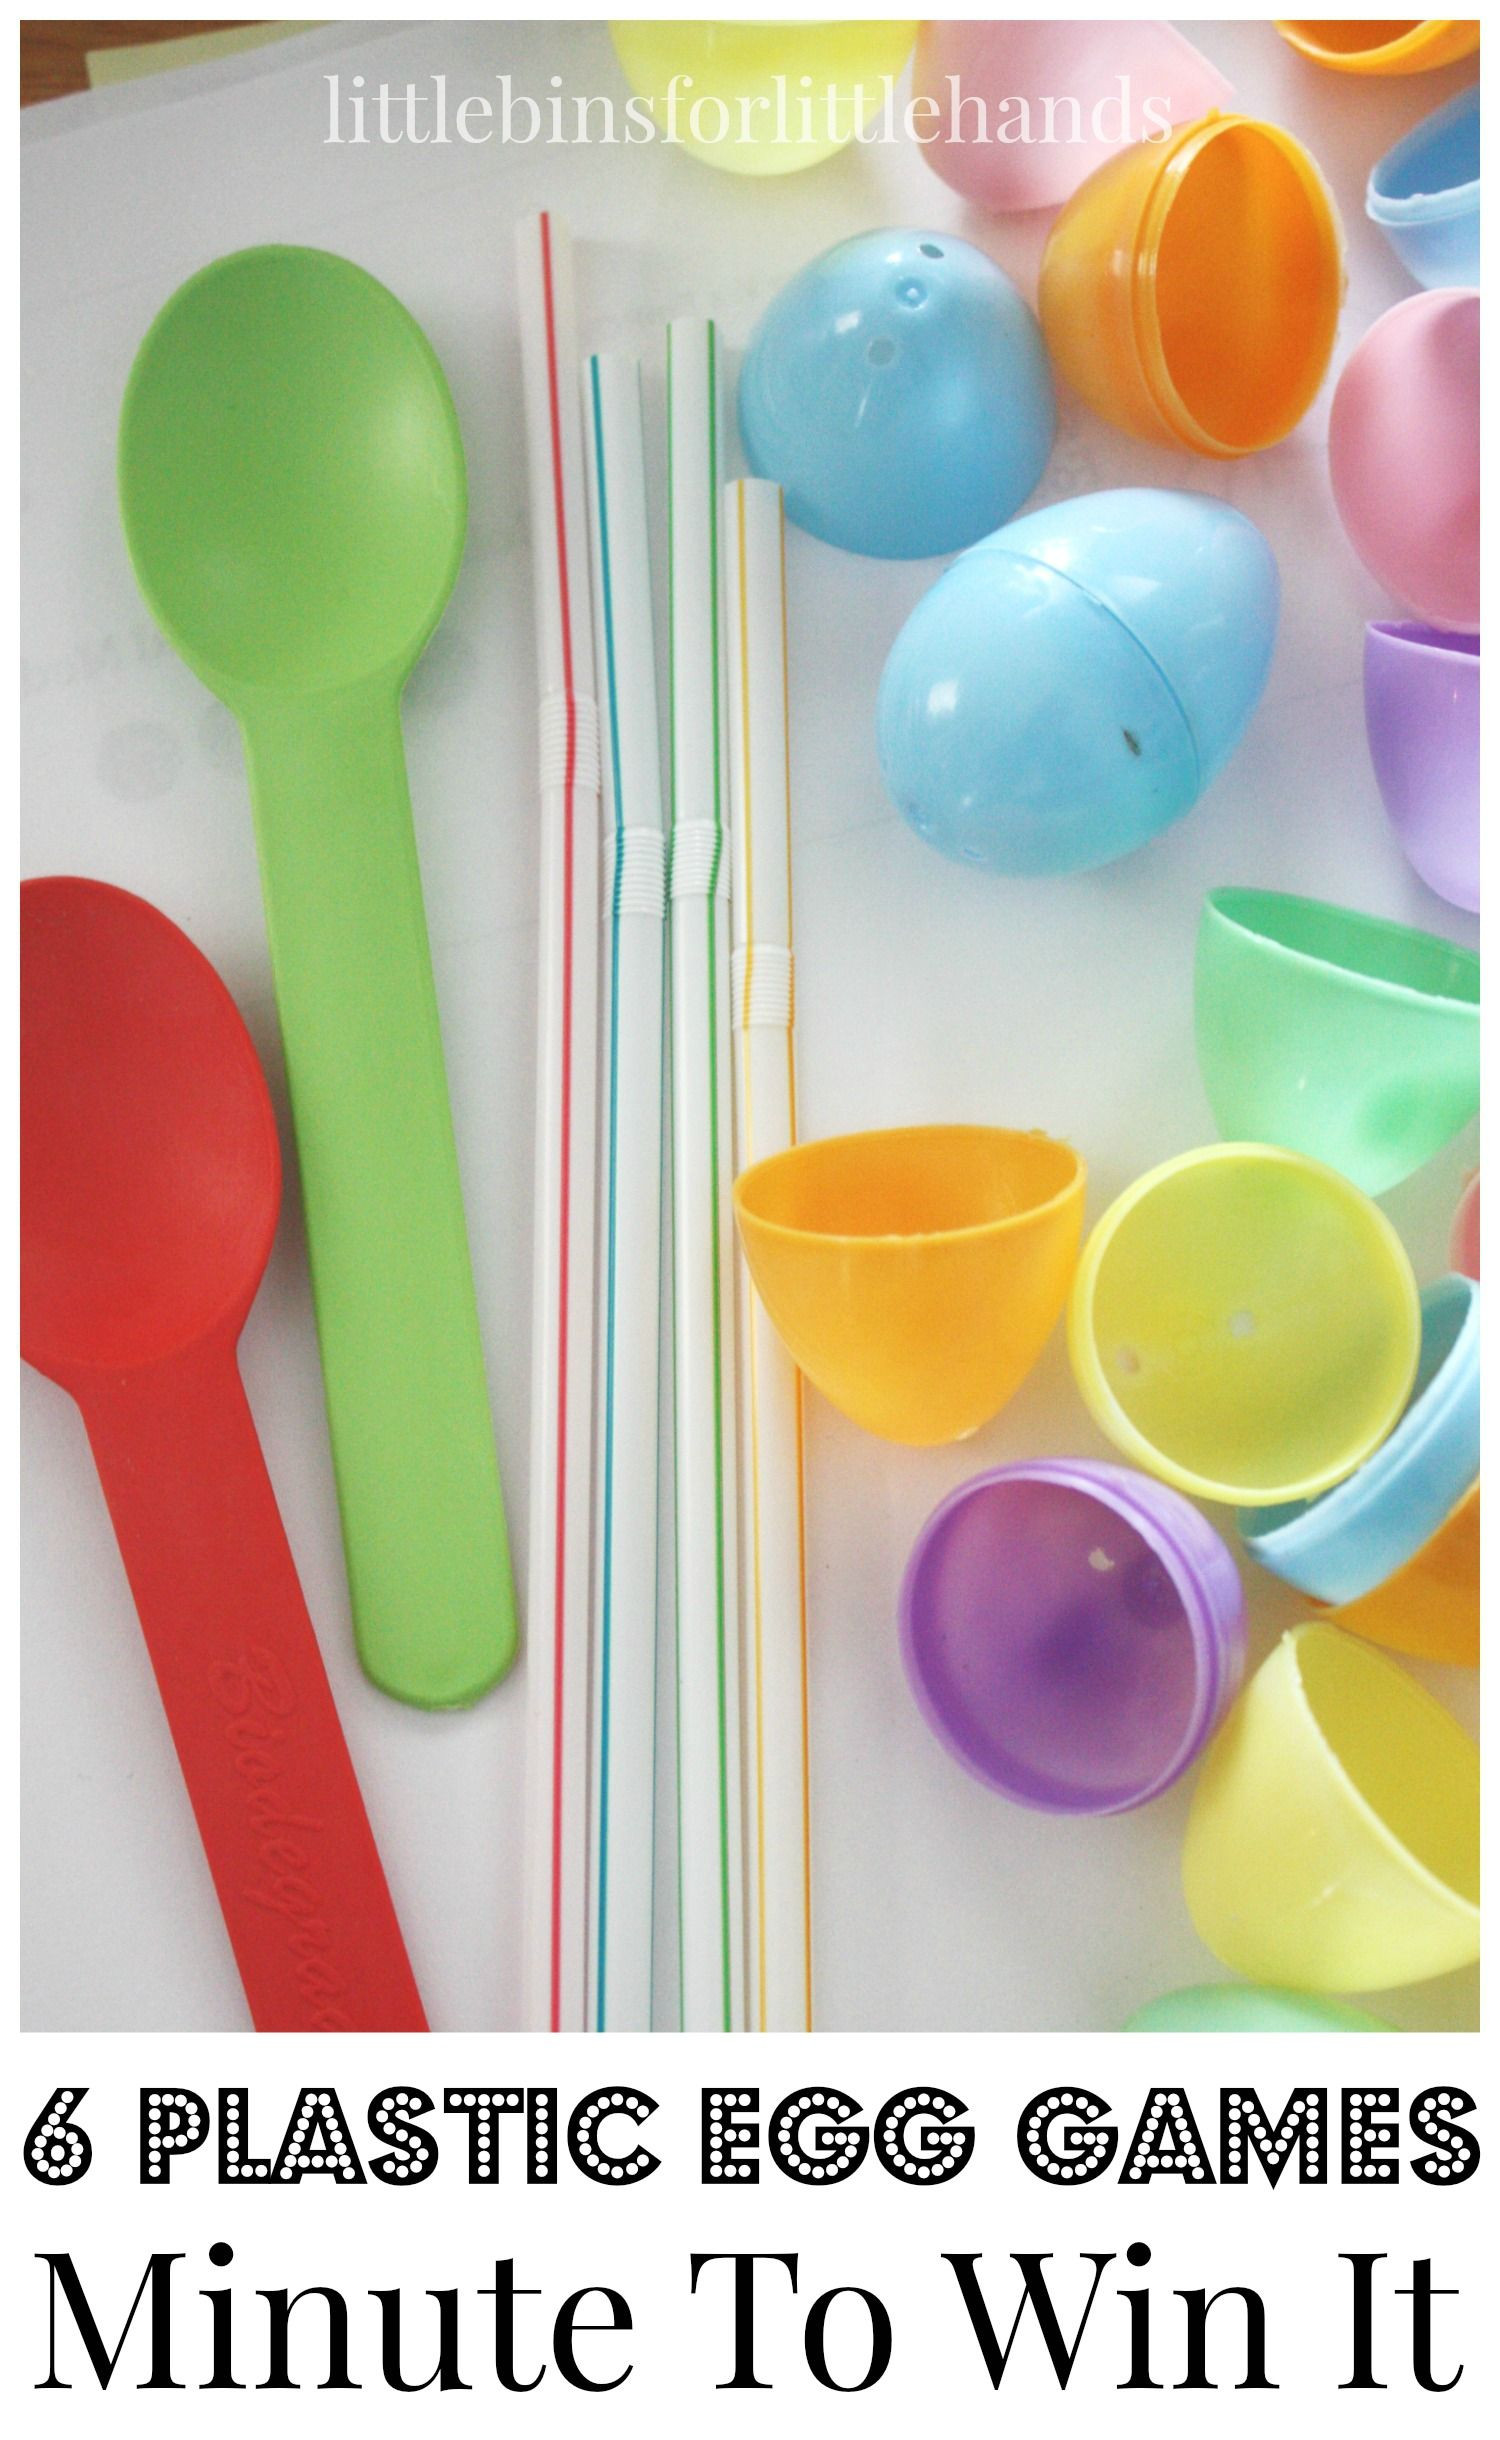 Easter Church Party Ideas
 The 25 best Easter egg hunt games ideas on Pinterest